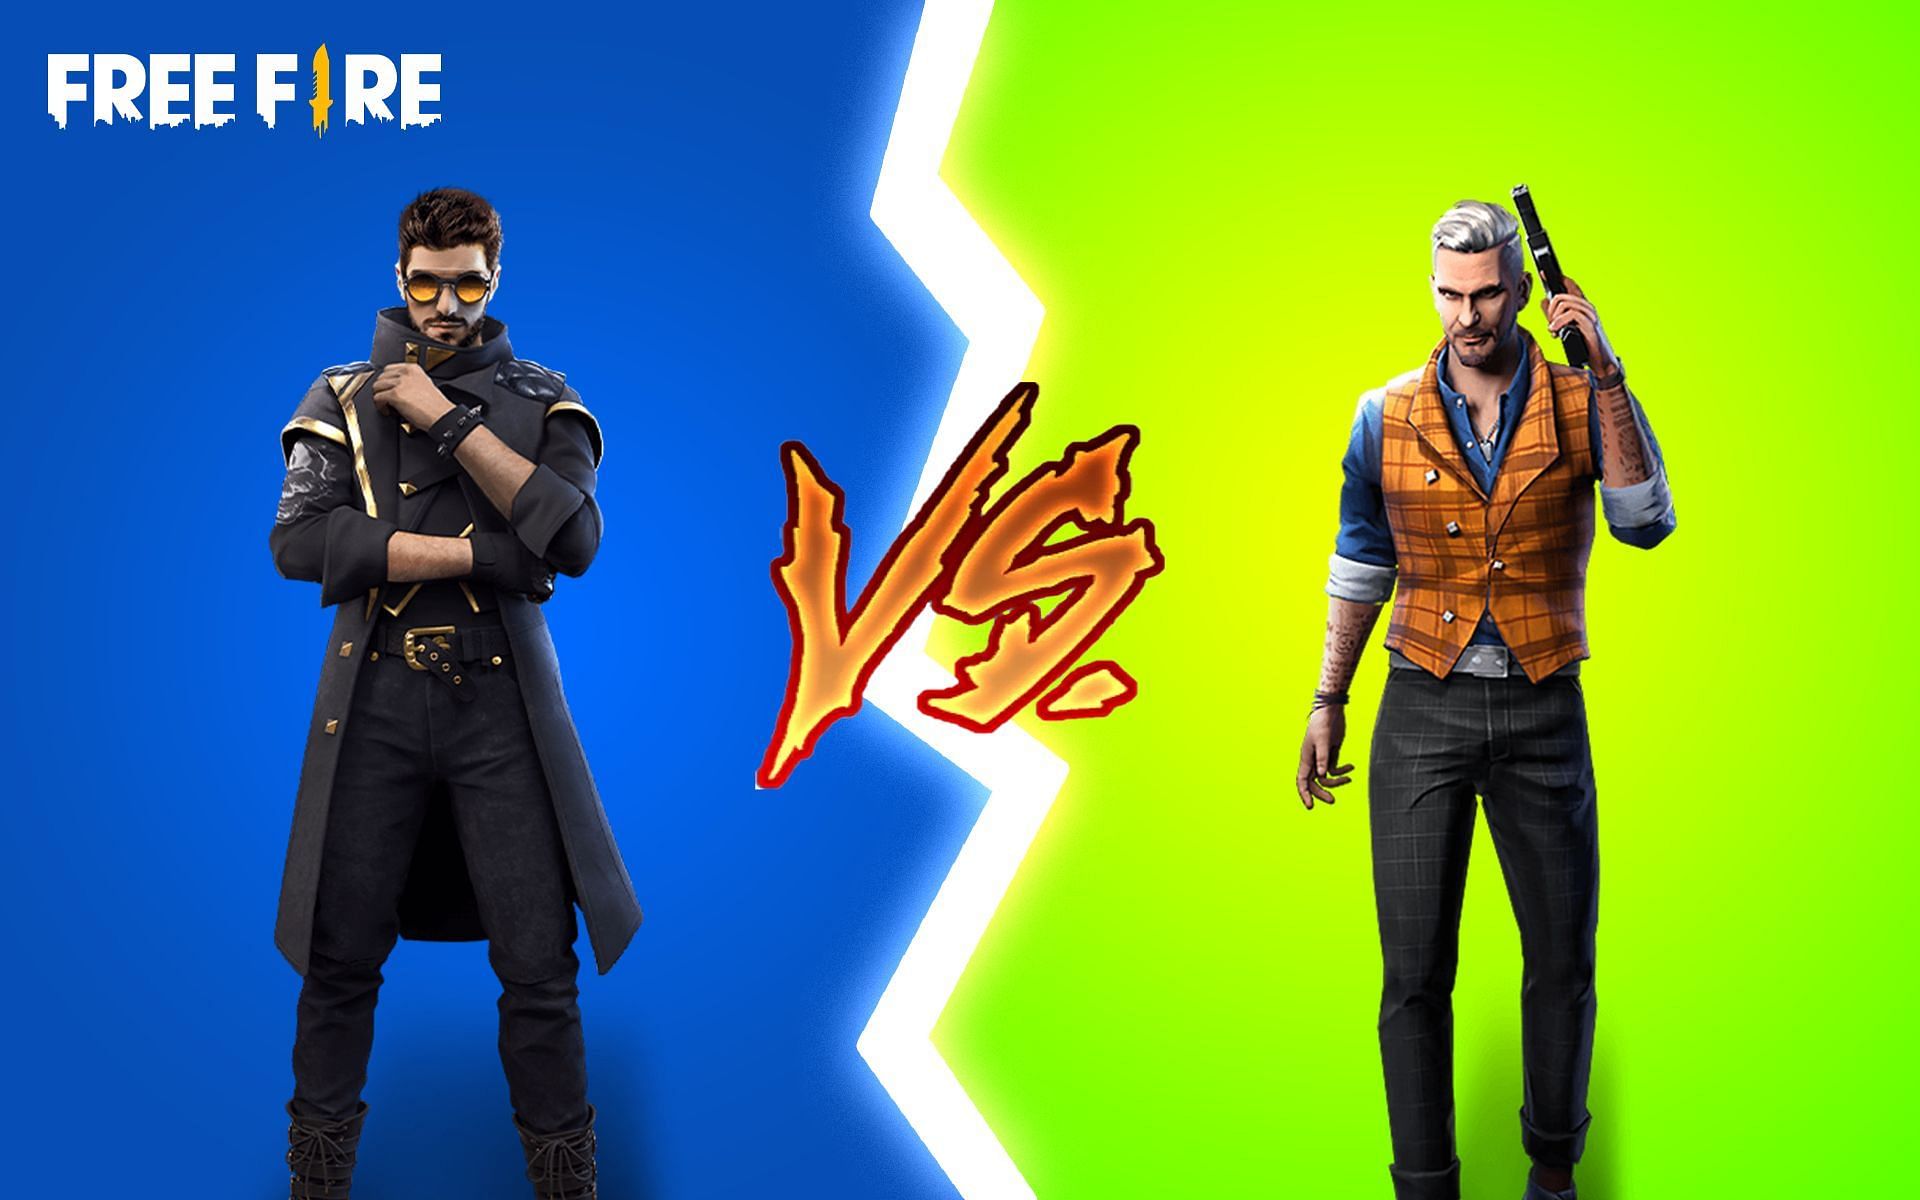 DJ Alok vs Joseph: Which Free Fire character is better for aggressive players? (Image via Sportskeeda)